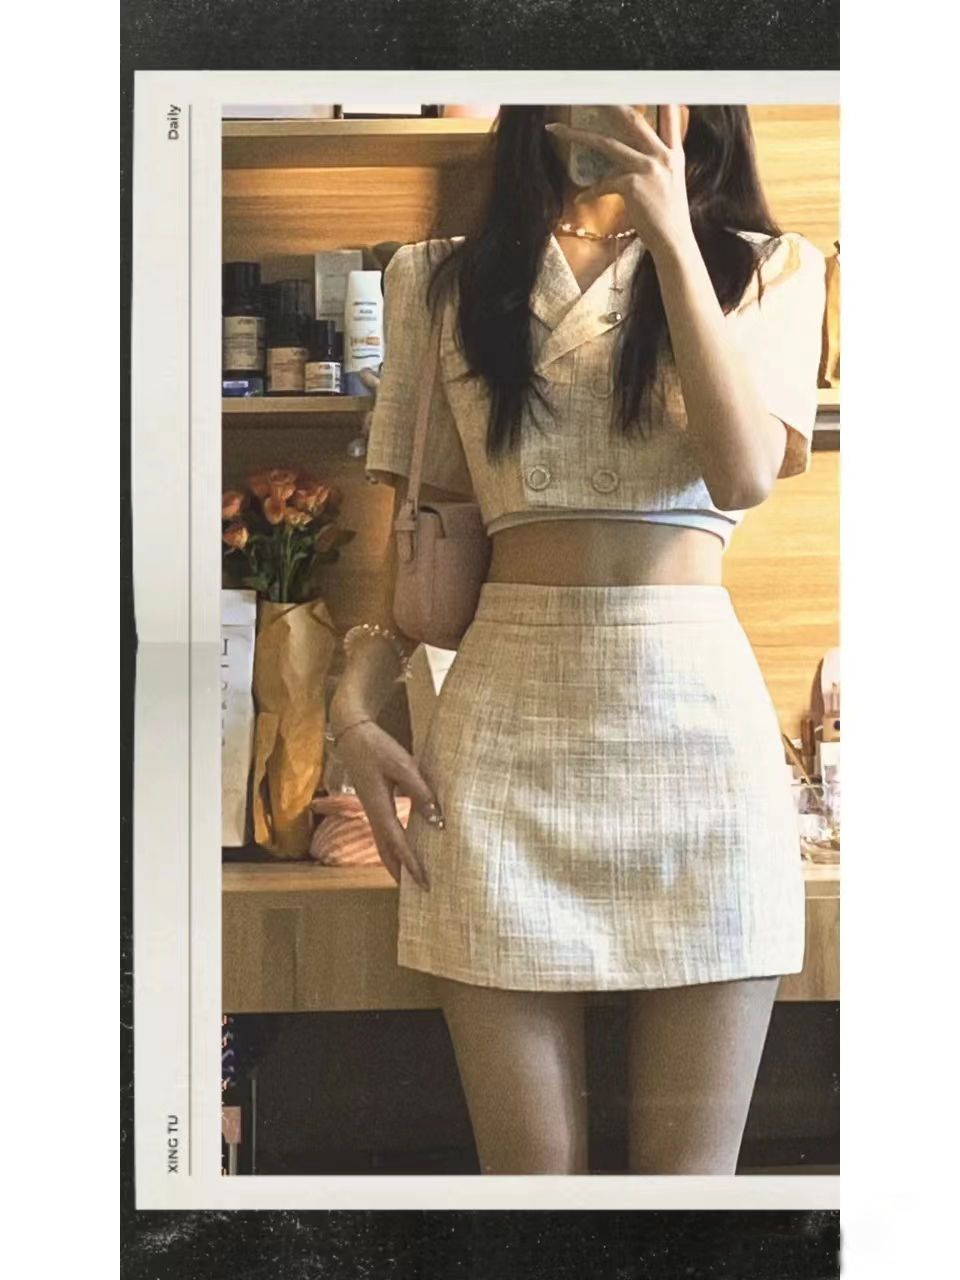 Suit women's 2022 summer new style small fragrant wind puff sleeve short suit top high waist skirt two-piece set